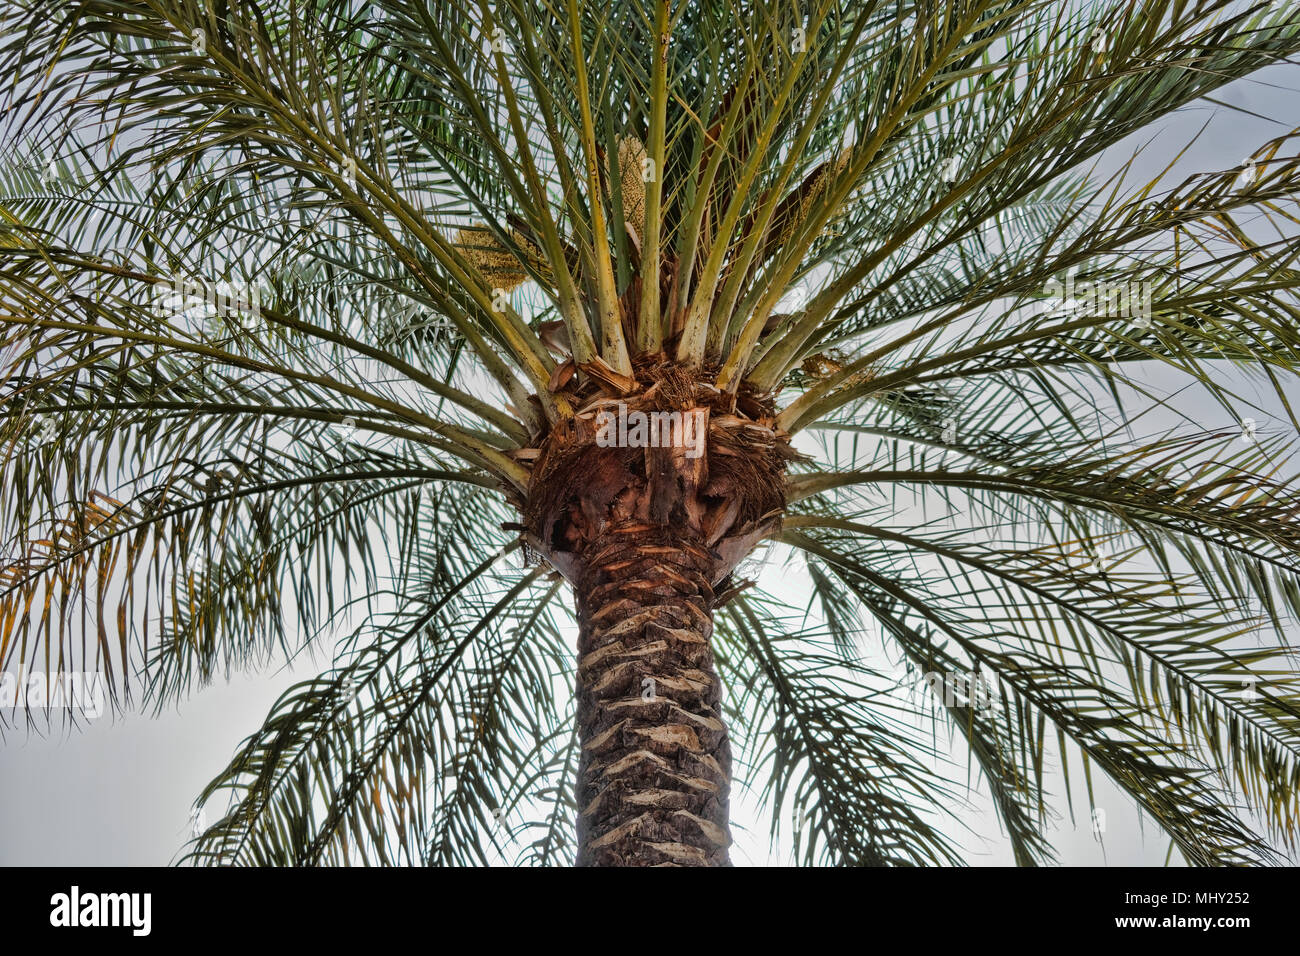 Large palm tree in the back light, photographed on the beach of Aqaba, Jordan, midle east Stock Photo